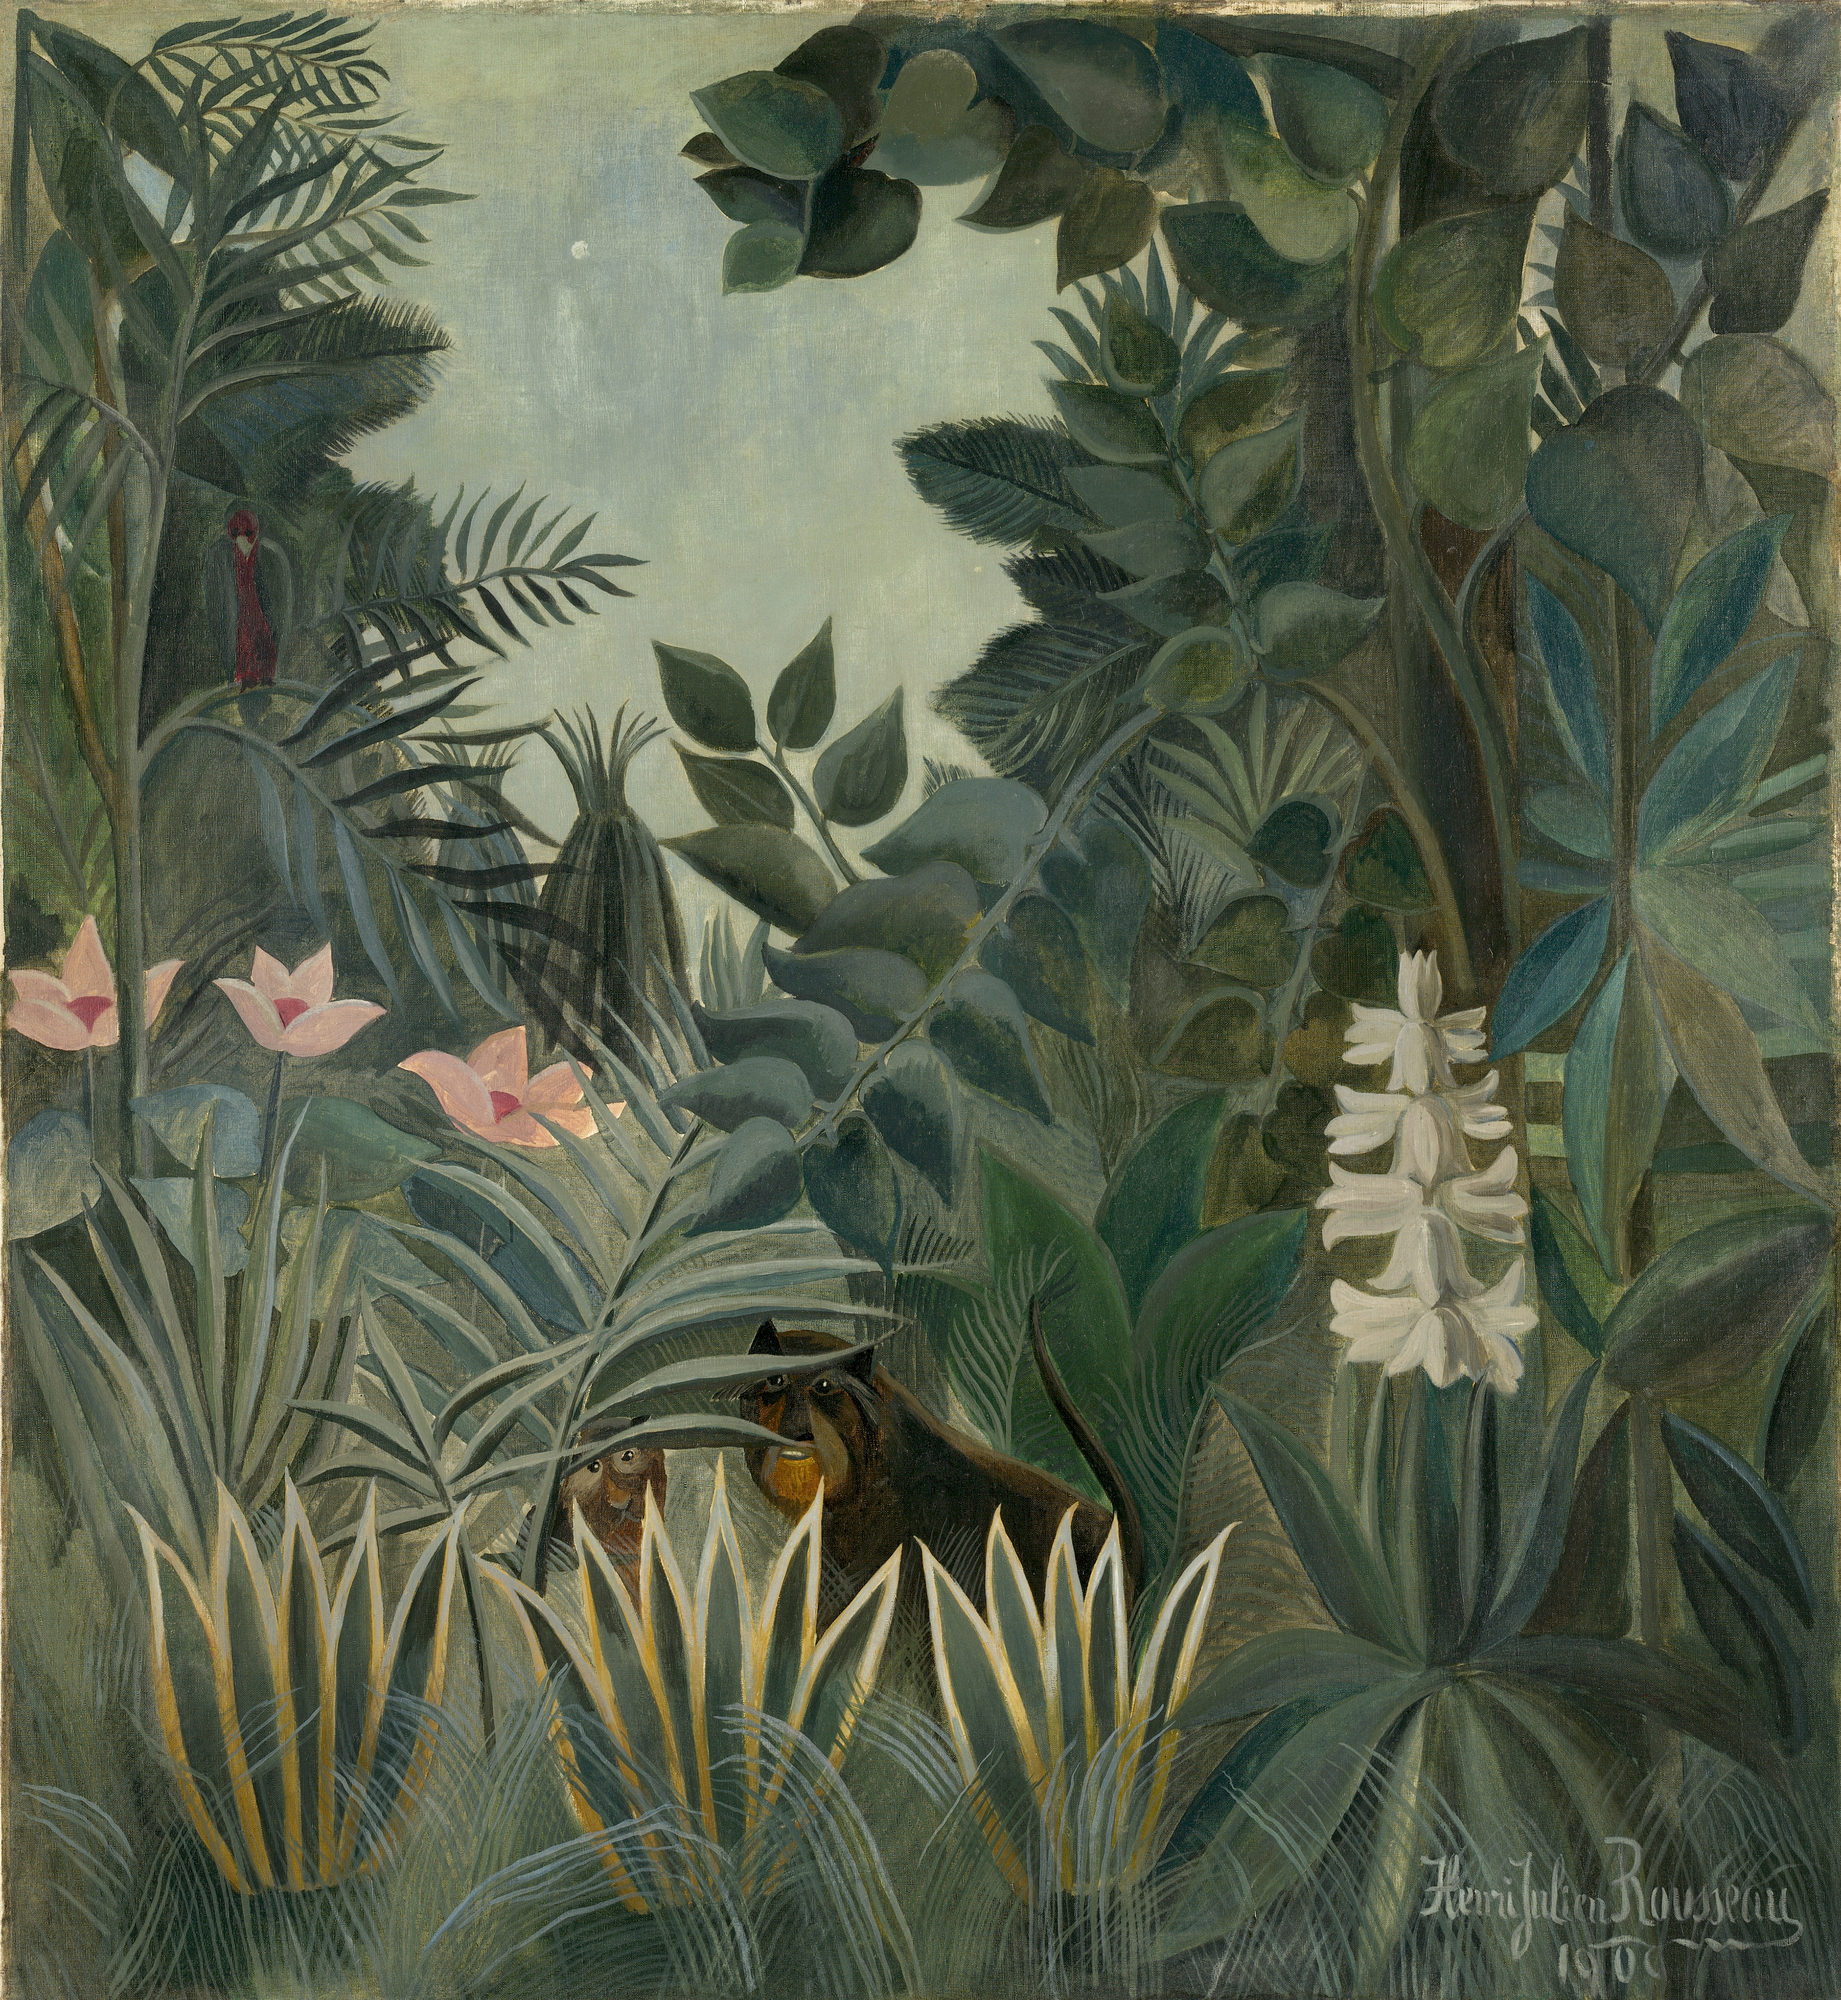 The Equatorial Jungle by Henri Rousseau - 1909 - 140.6 x 129.5 cm National Gallery of Art